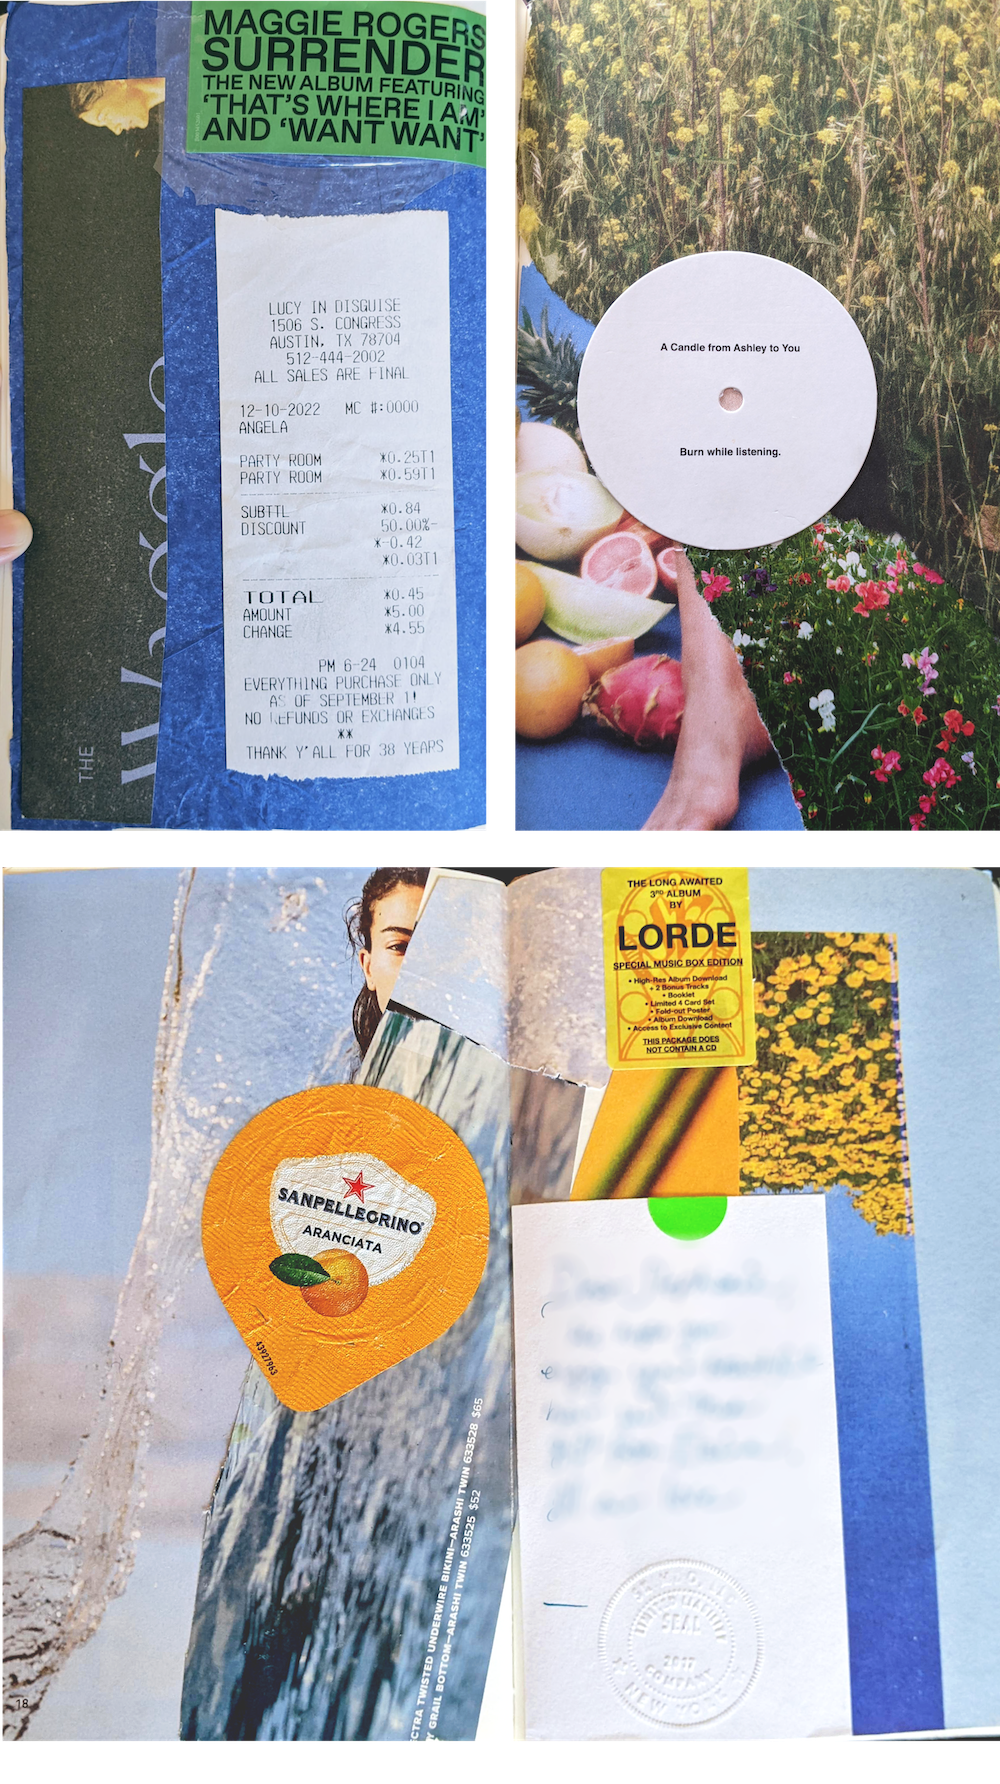 collages that are bright and colorful, featuring stickers from maggie rogers, lorde, and halsey albums, as well as imagery of flowers, fruit, ocean waves, and the sky